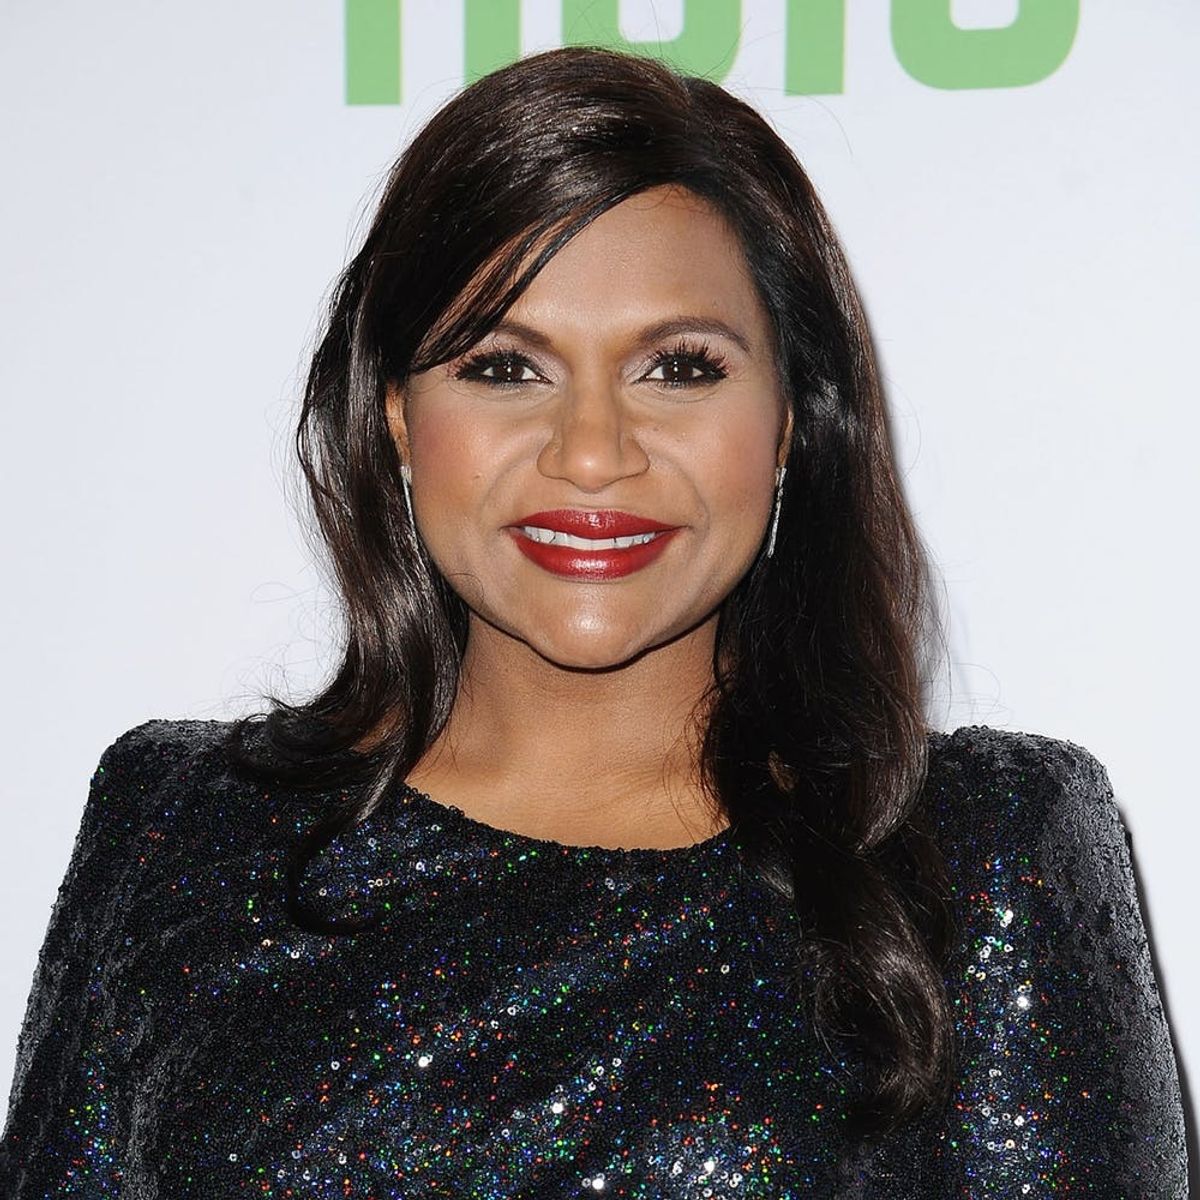 Mindy Kaling’s Next Show ‘Champions’ Could Become Your Favorite New Comedy